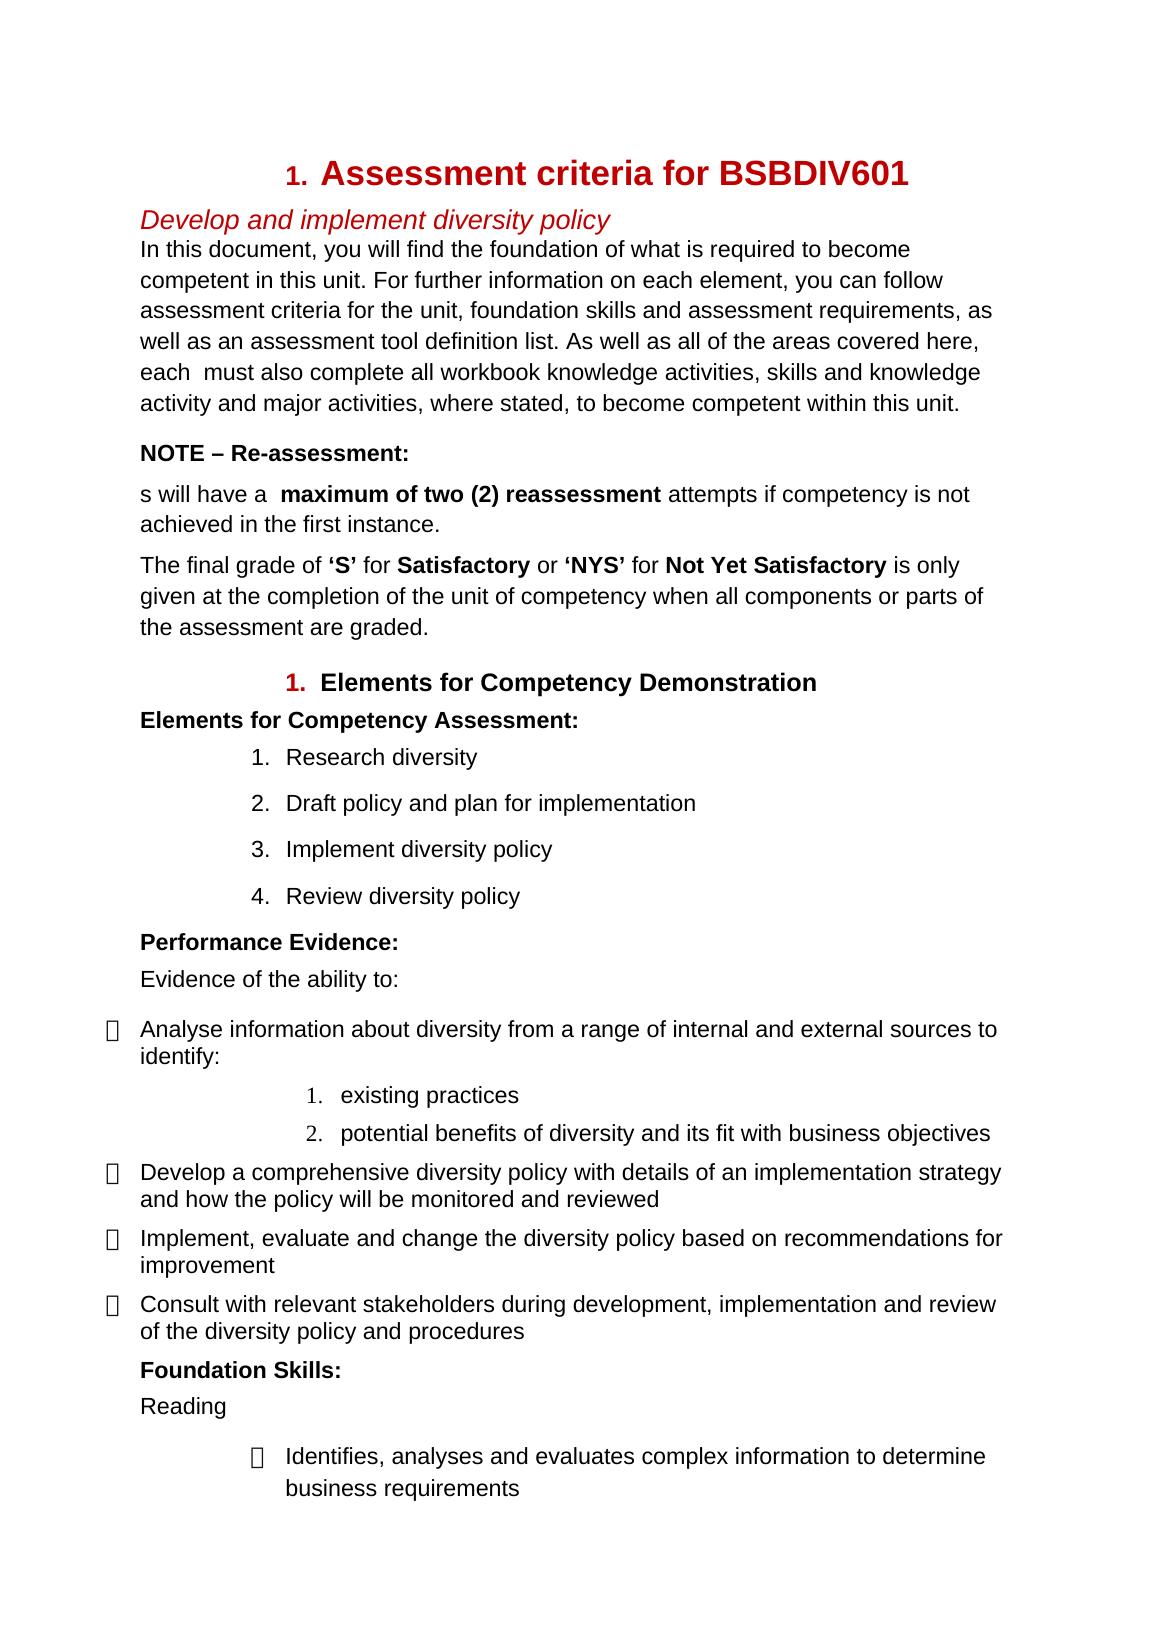 Assessment criteria for BSBDIV601 Develop and implement diversity policy_1